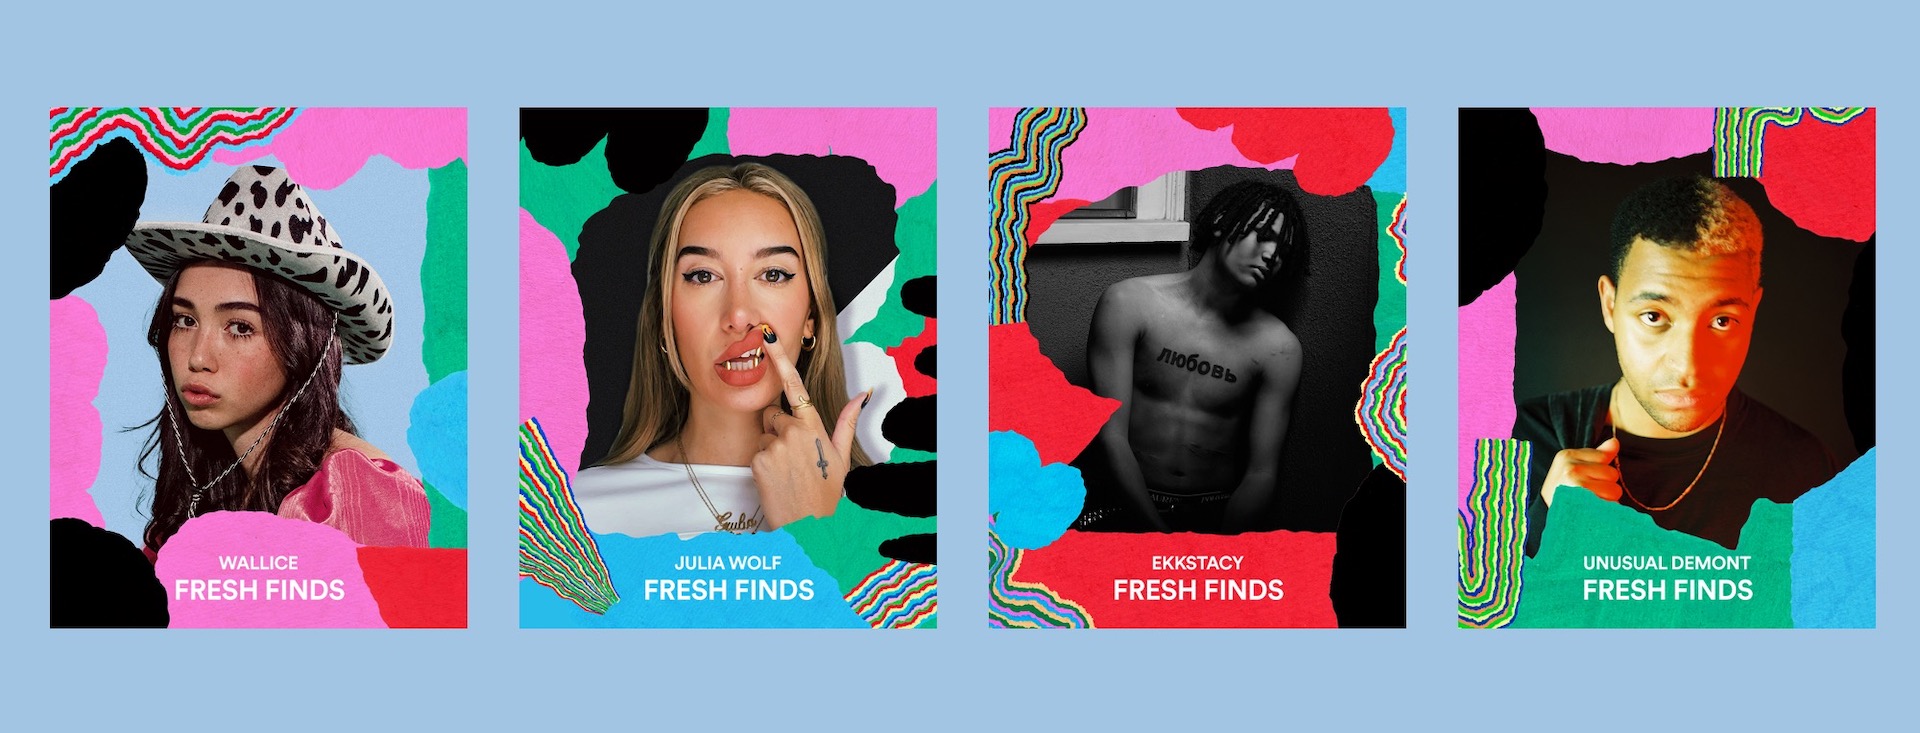 Spotify Fresh Finds are launching a partnership program for independent artists